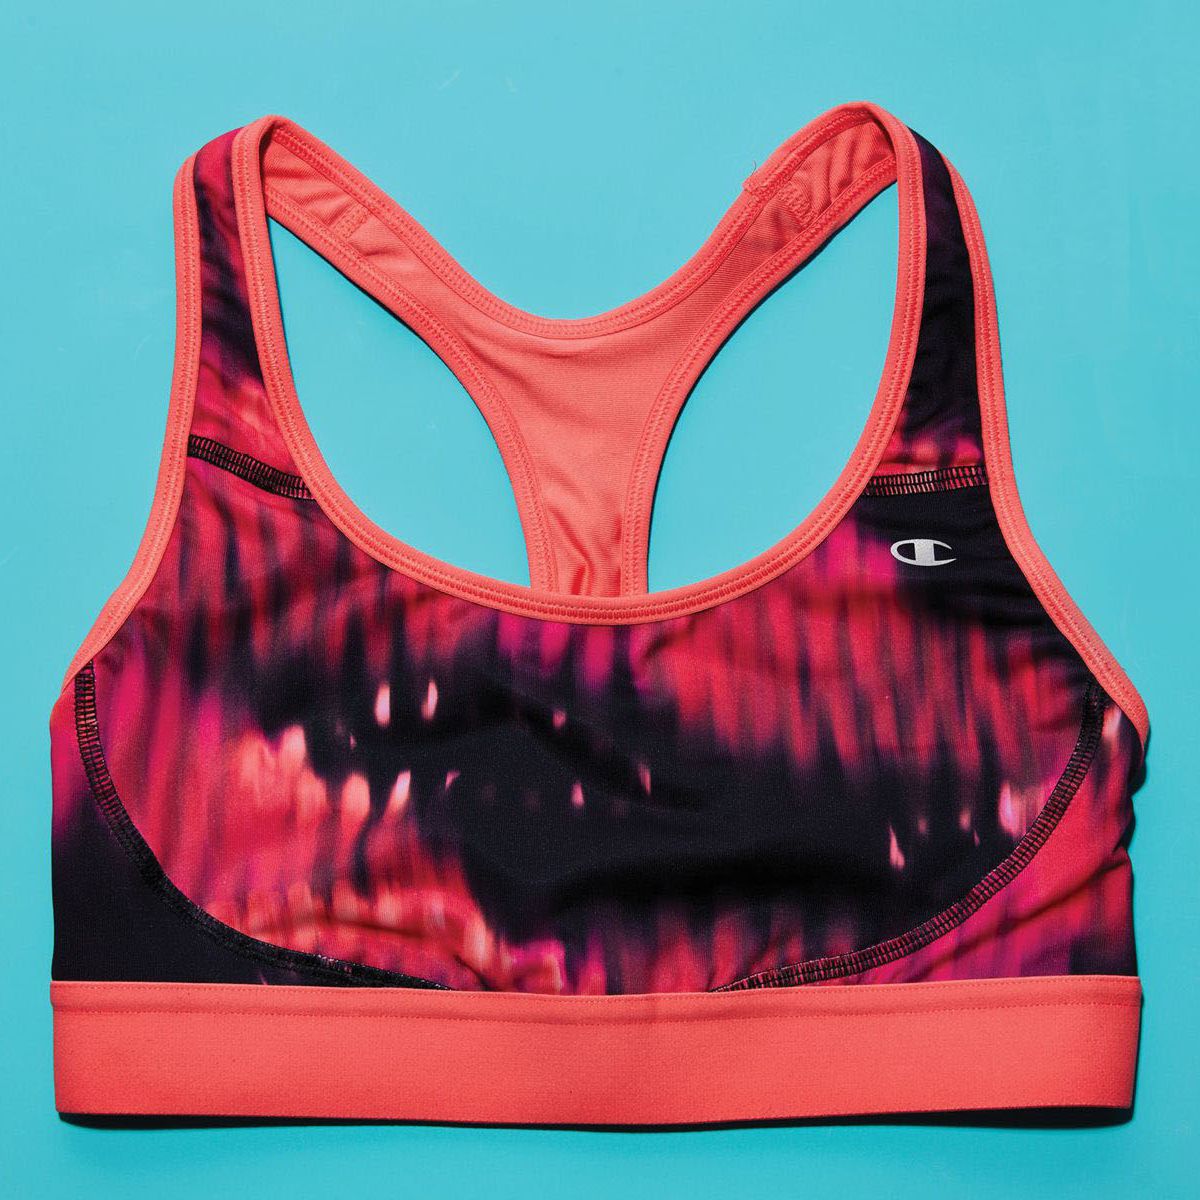 Champion B9500 Absolute Cami Sports Bra with SmoothTec Band